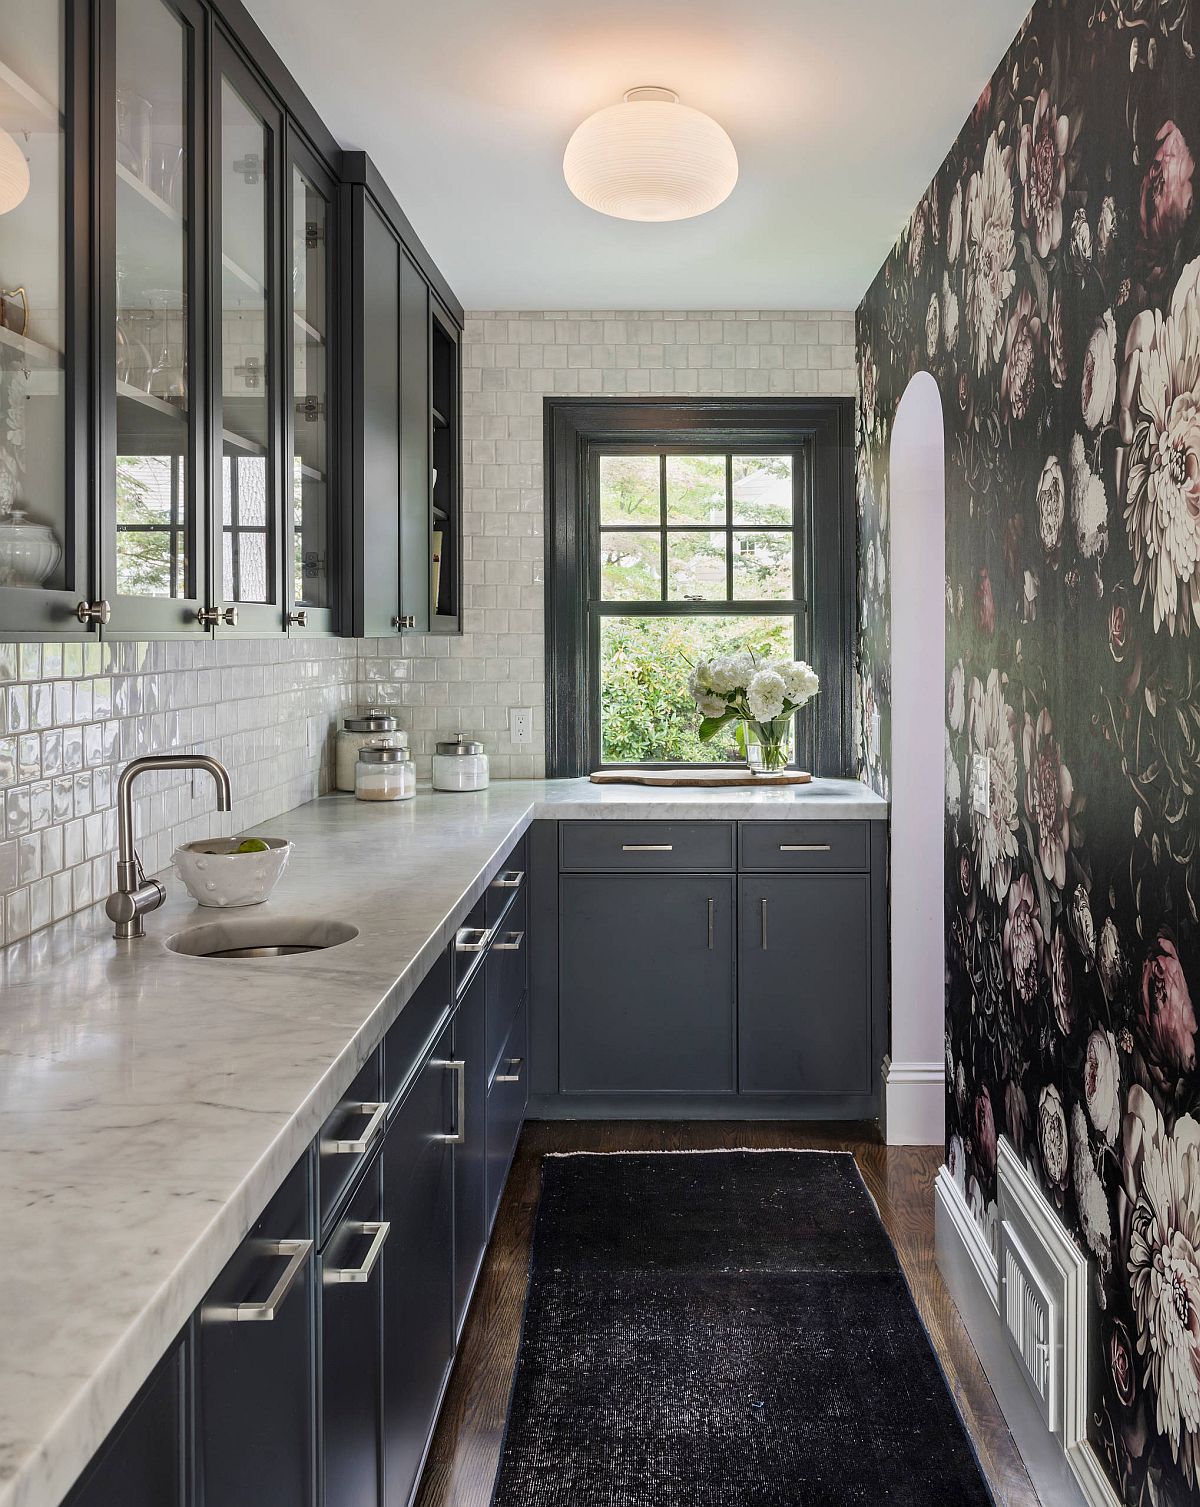 Flowery-wallpaper-covers-an-entire-wall-in-this-narrow-kitchen-and-gives-it-a-dashing-unique-aesthetic-91369